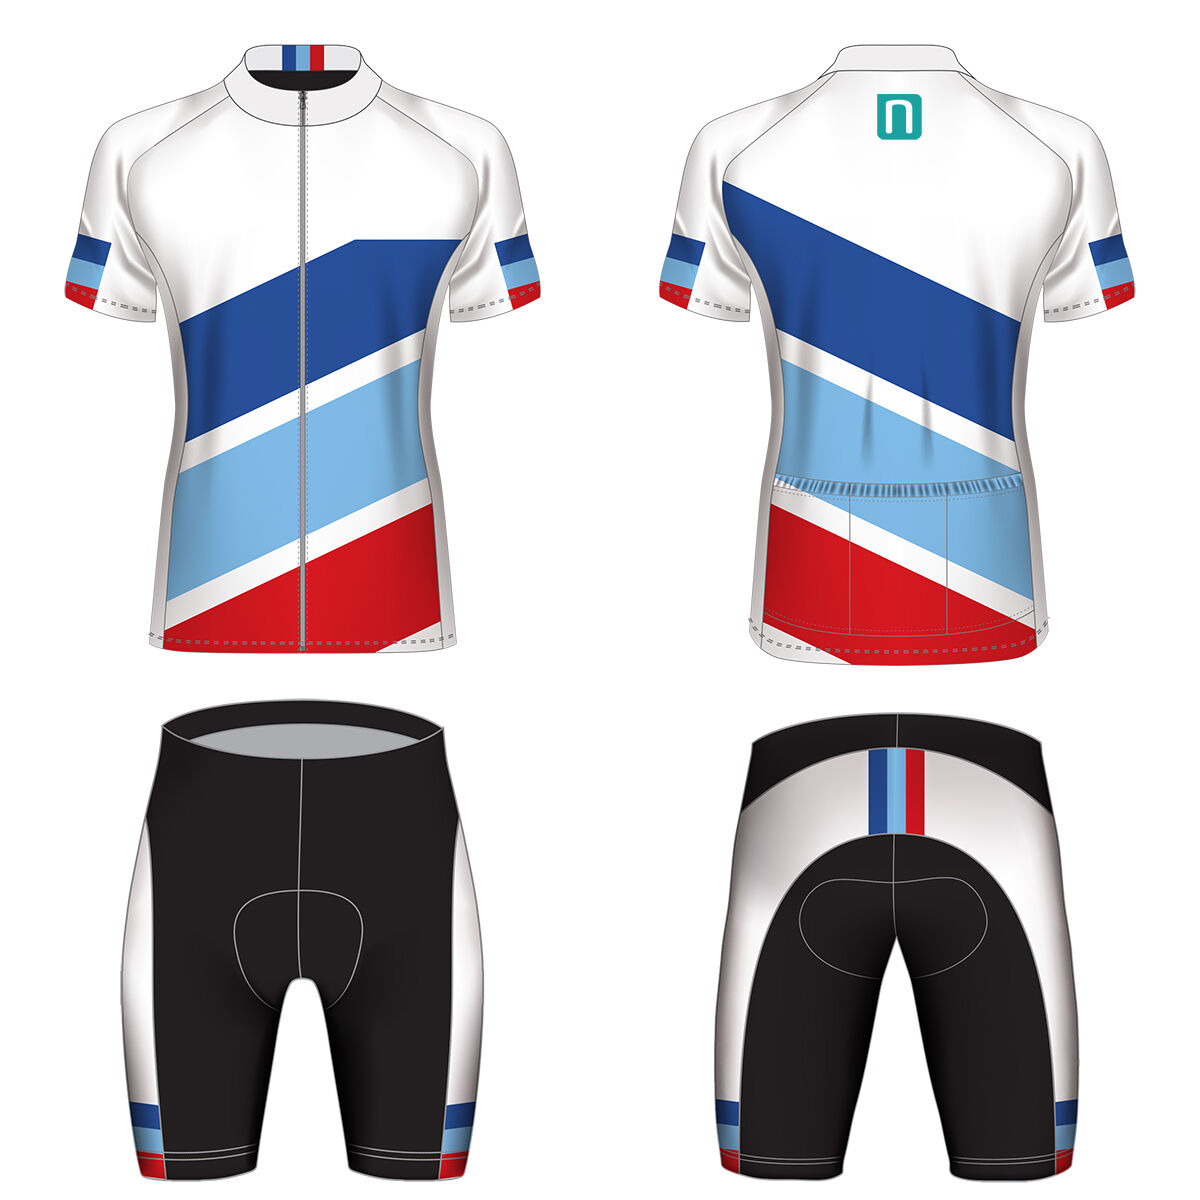 Personalised Cycle Jerseys